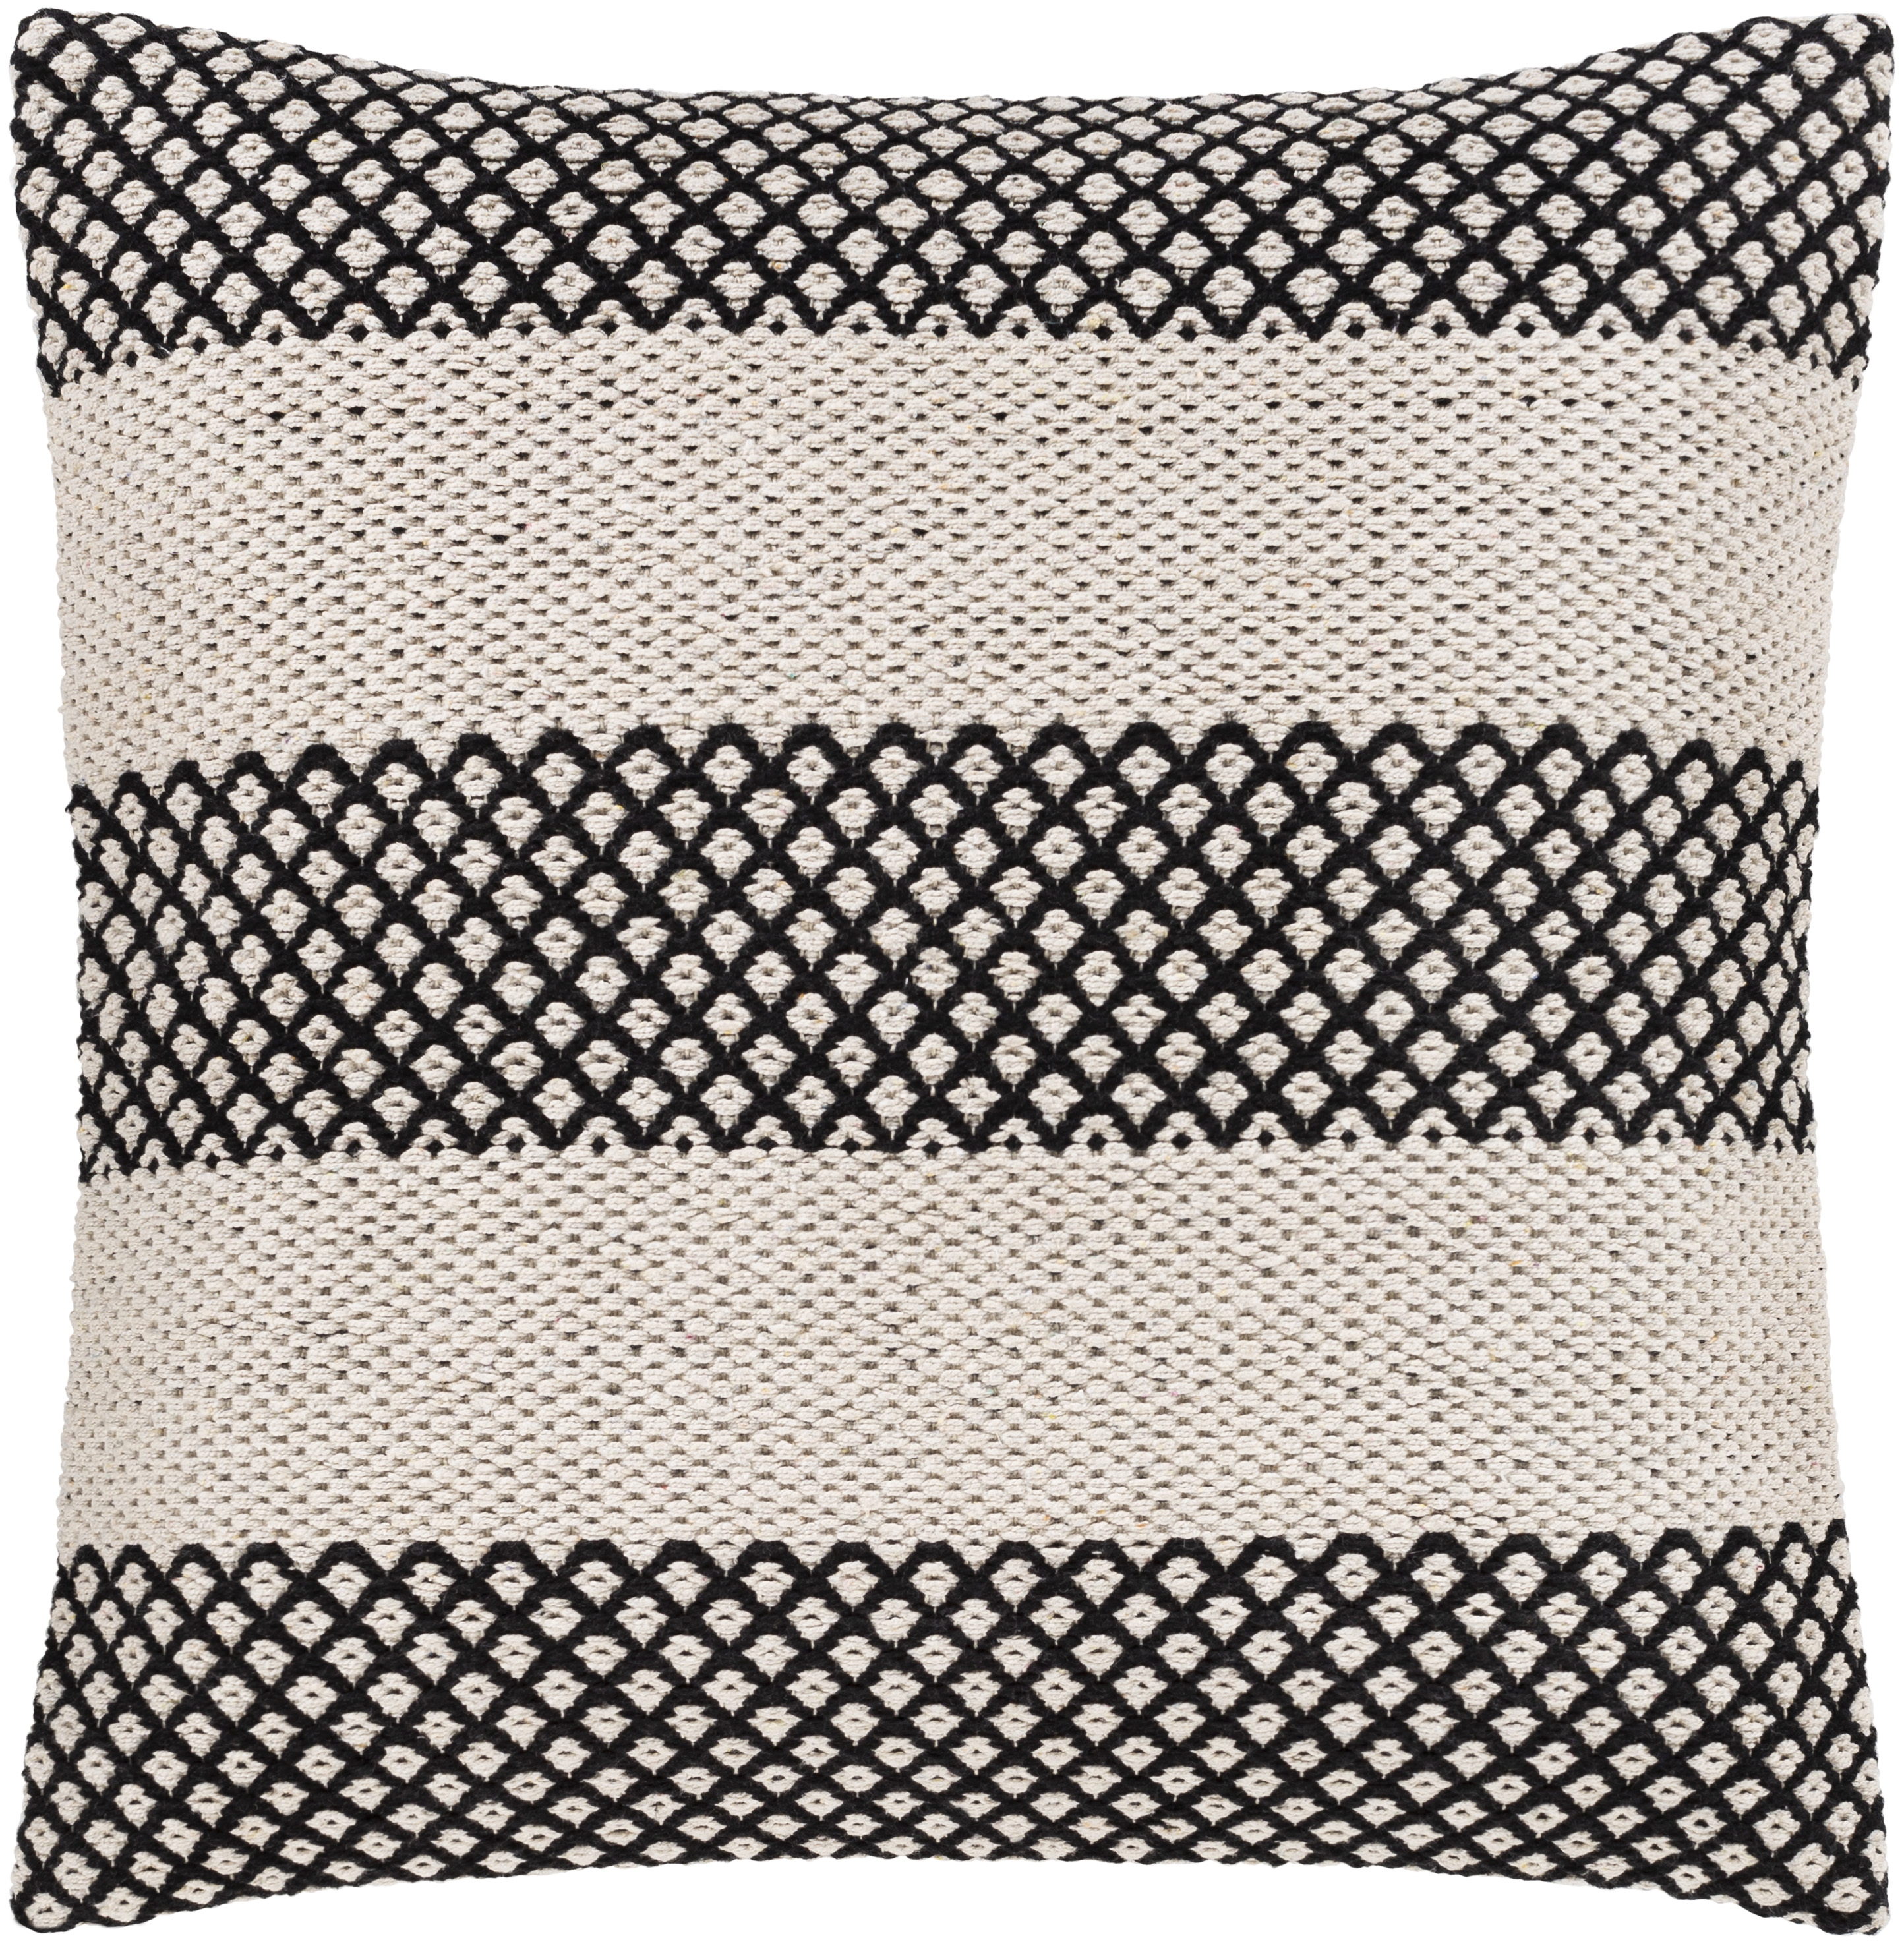 Ryder Throw Pillow, 20" x 20", with down insert - Image 0